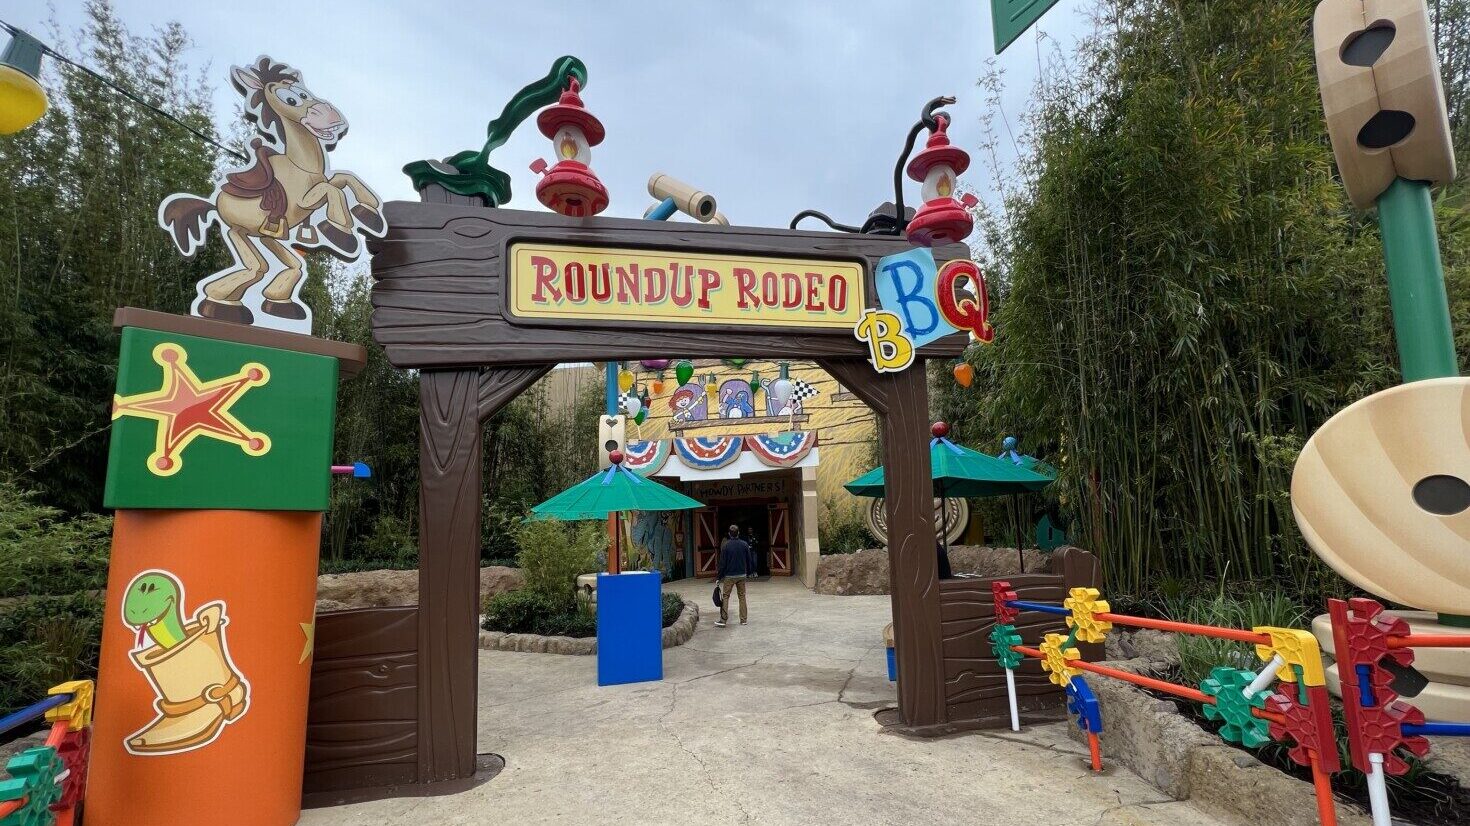 Entrance to Roundup Rodeo BBQ at Disney World